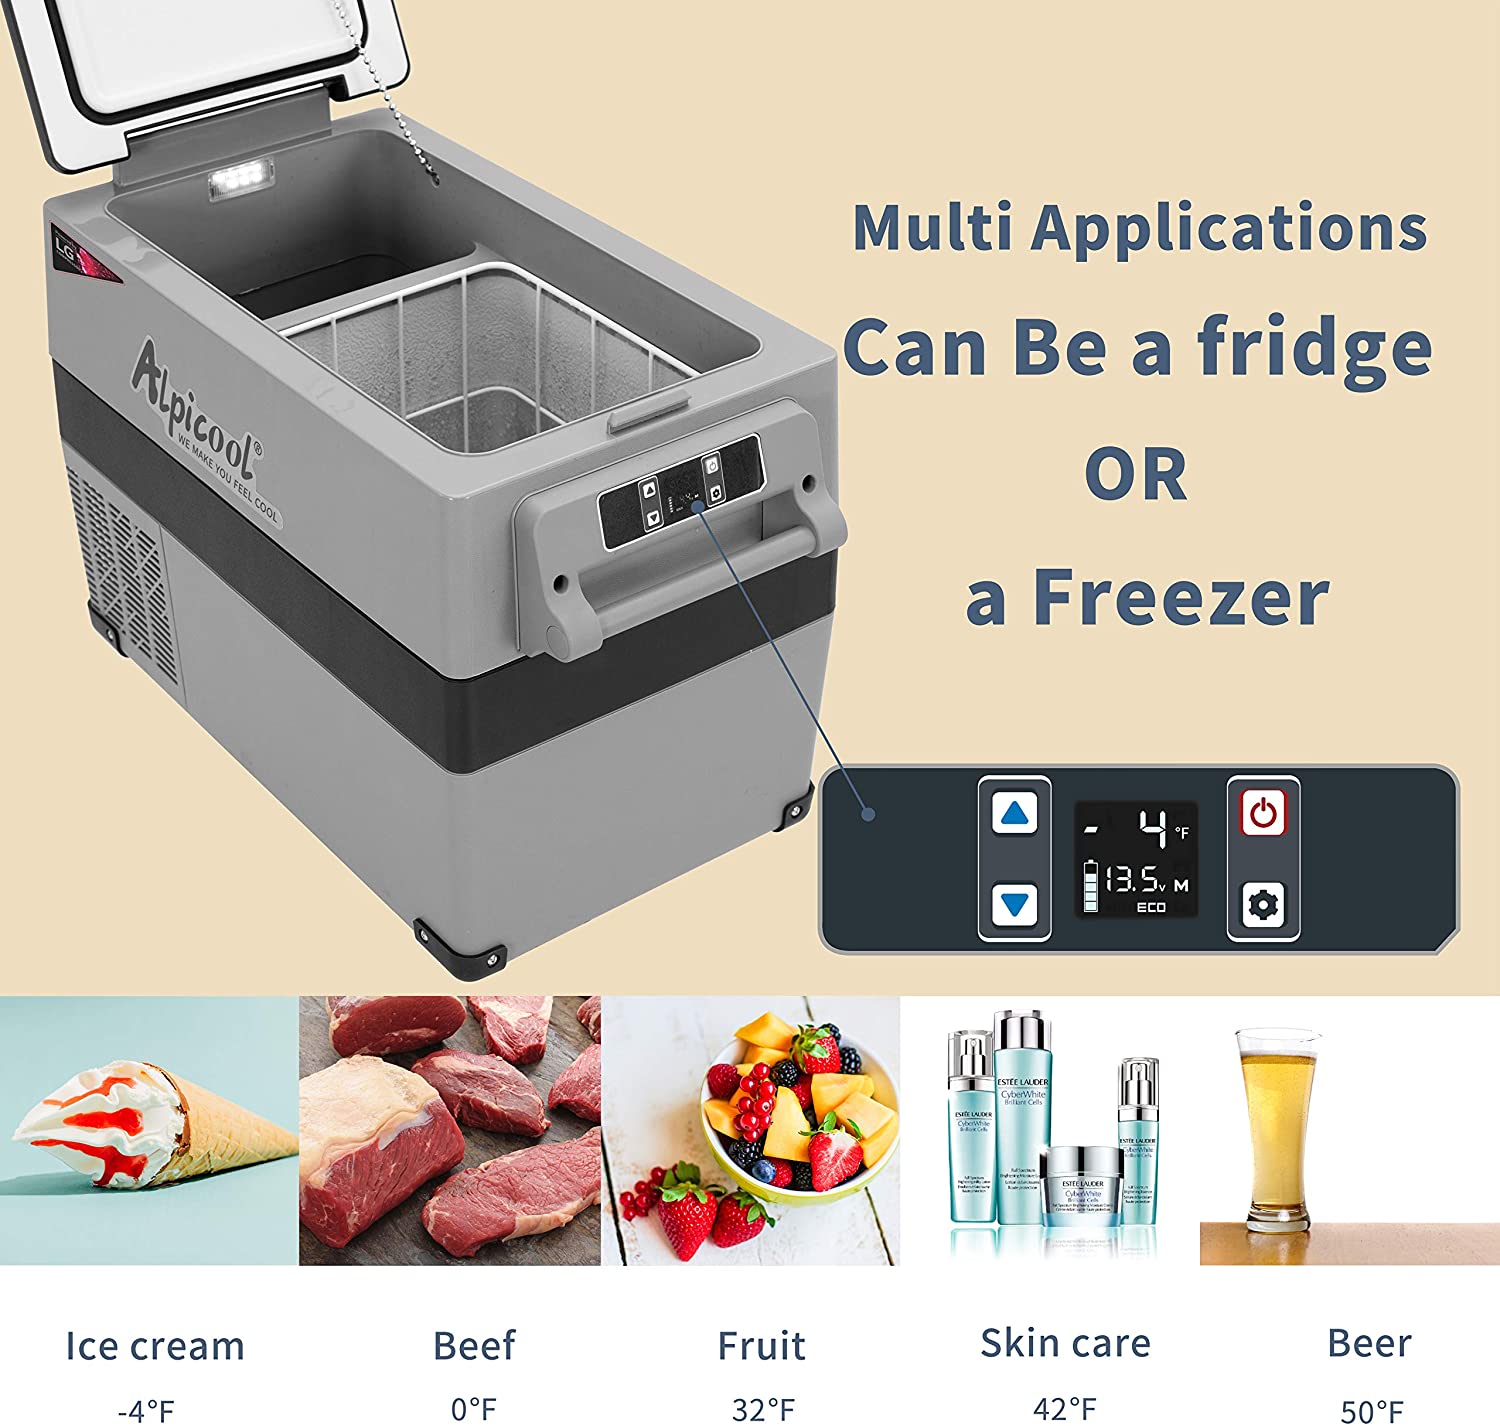 10 Best Portable Freezer 2022 Review For Car Freezers, Camping, RVs, Truck, Boats Electric Coolers All In One Cooling Gear Lab: Any Refrigerators Air Conditioners Freezers Ice Makers Coolers Fans Reviewed And Compared.